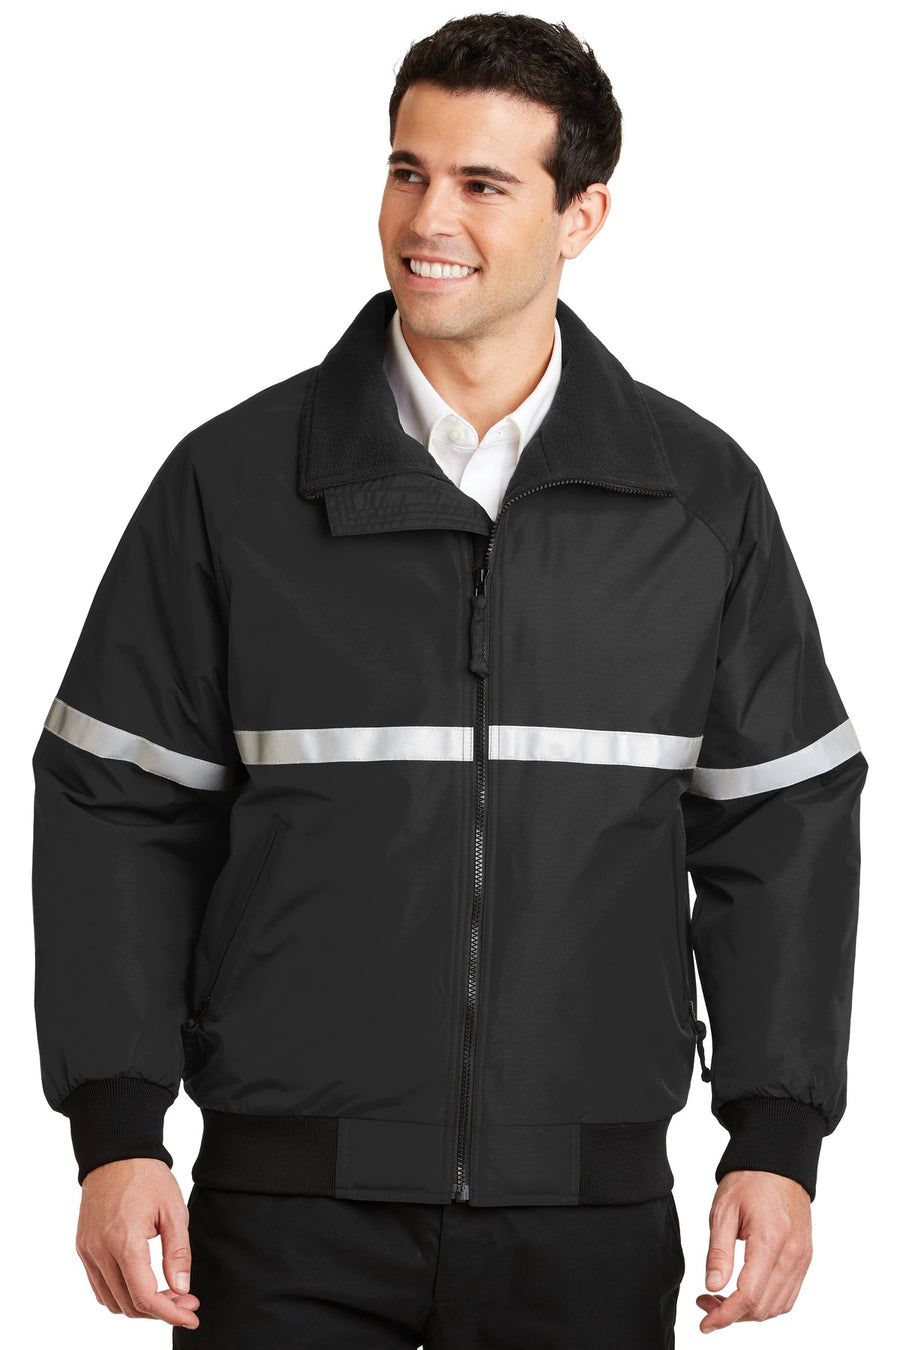 Port Authority Challenger Jacket with Reflective Taping.